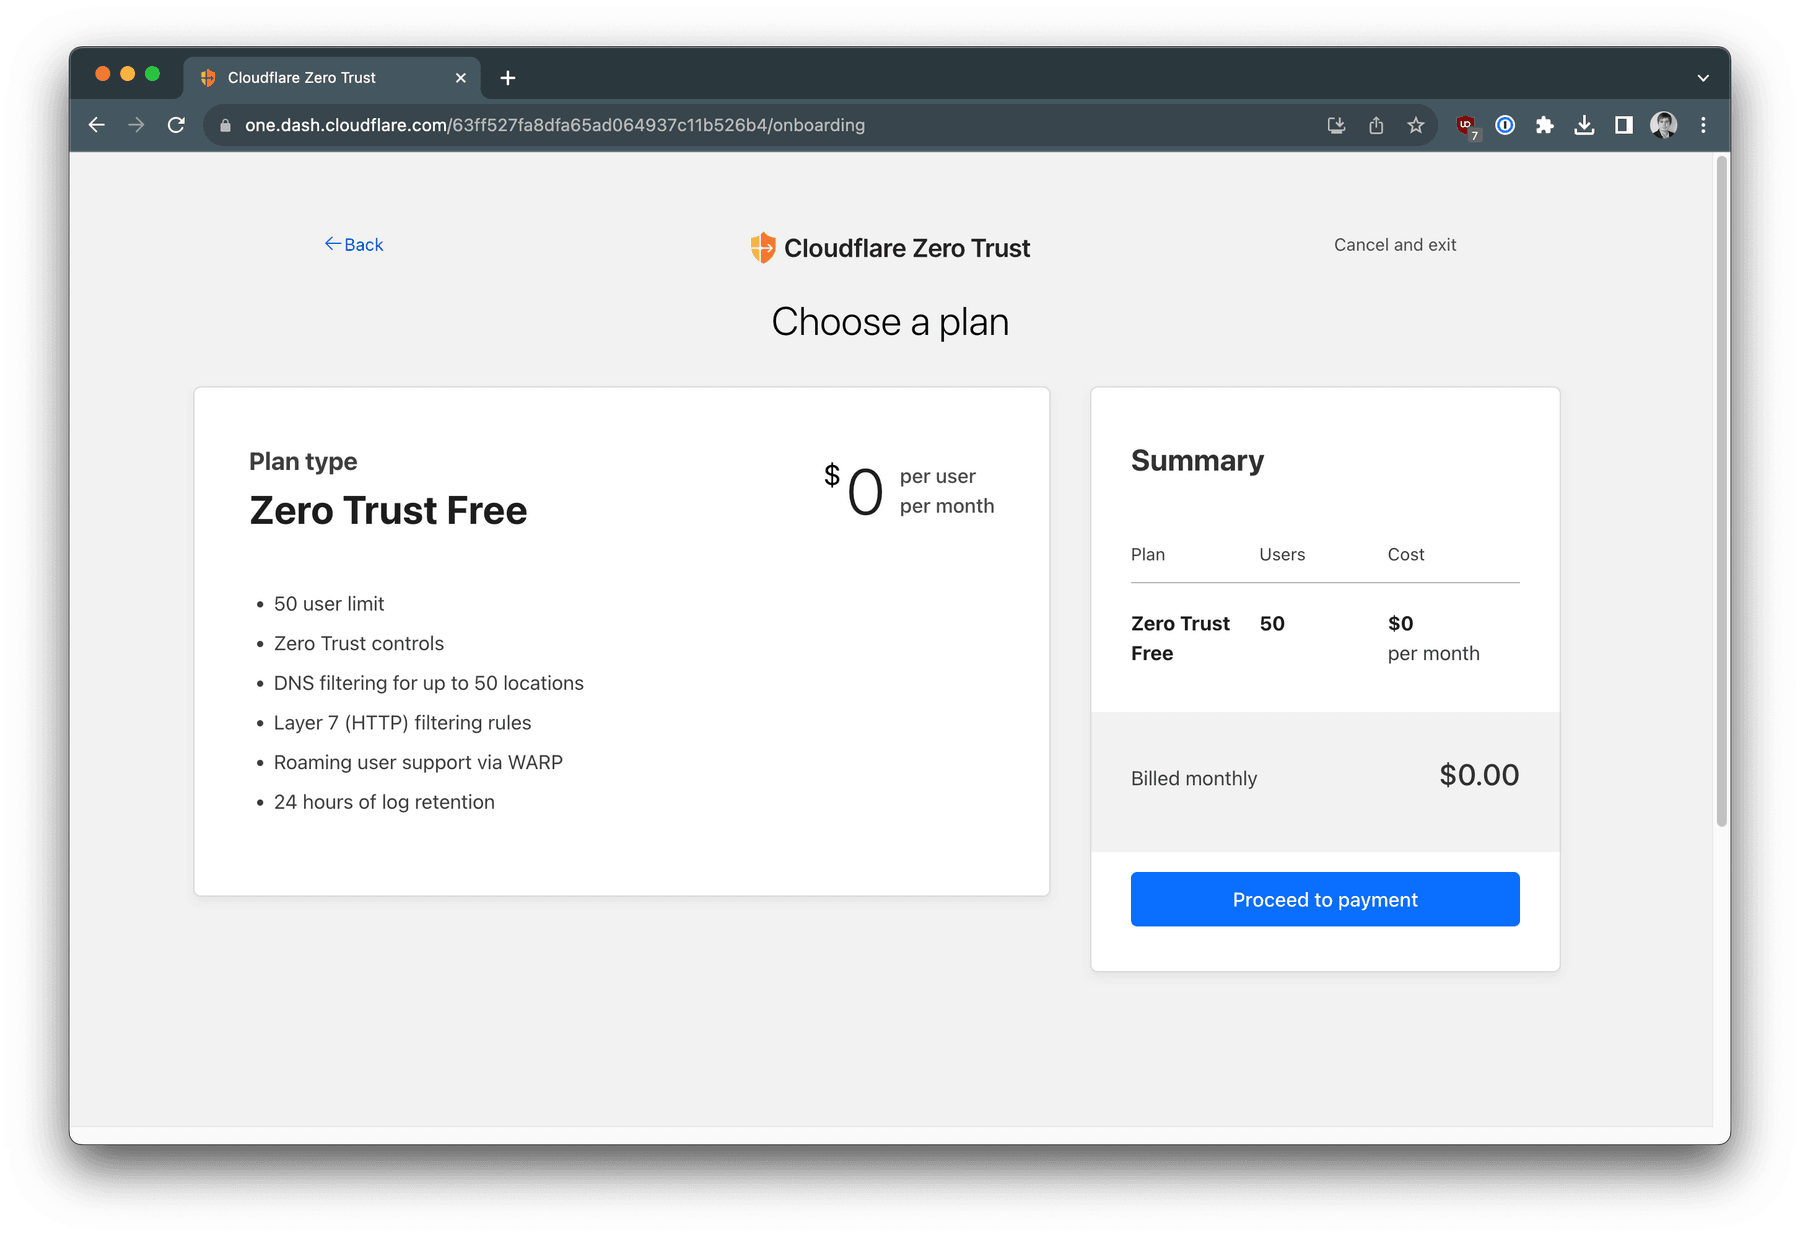 Check your bill an click Proceed to payment button